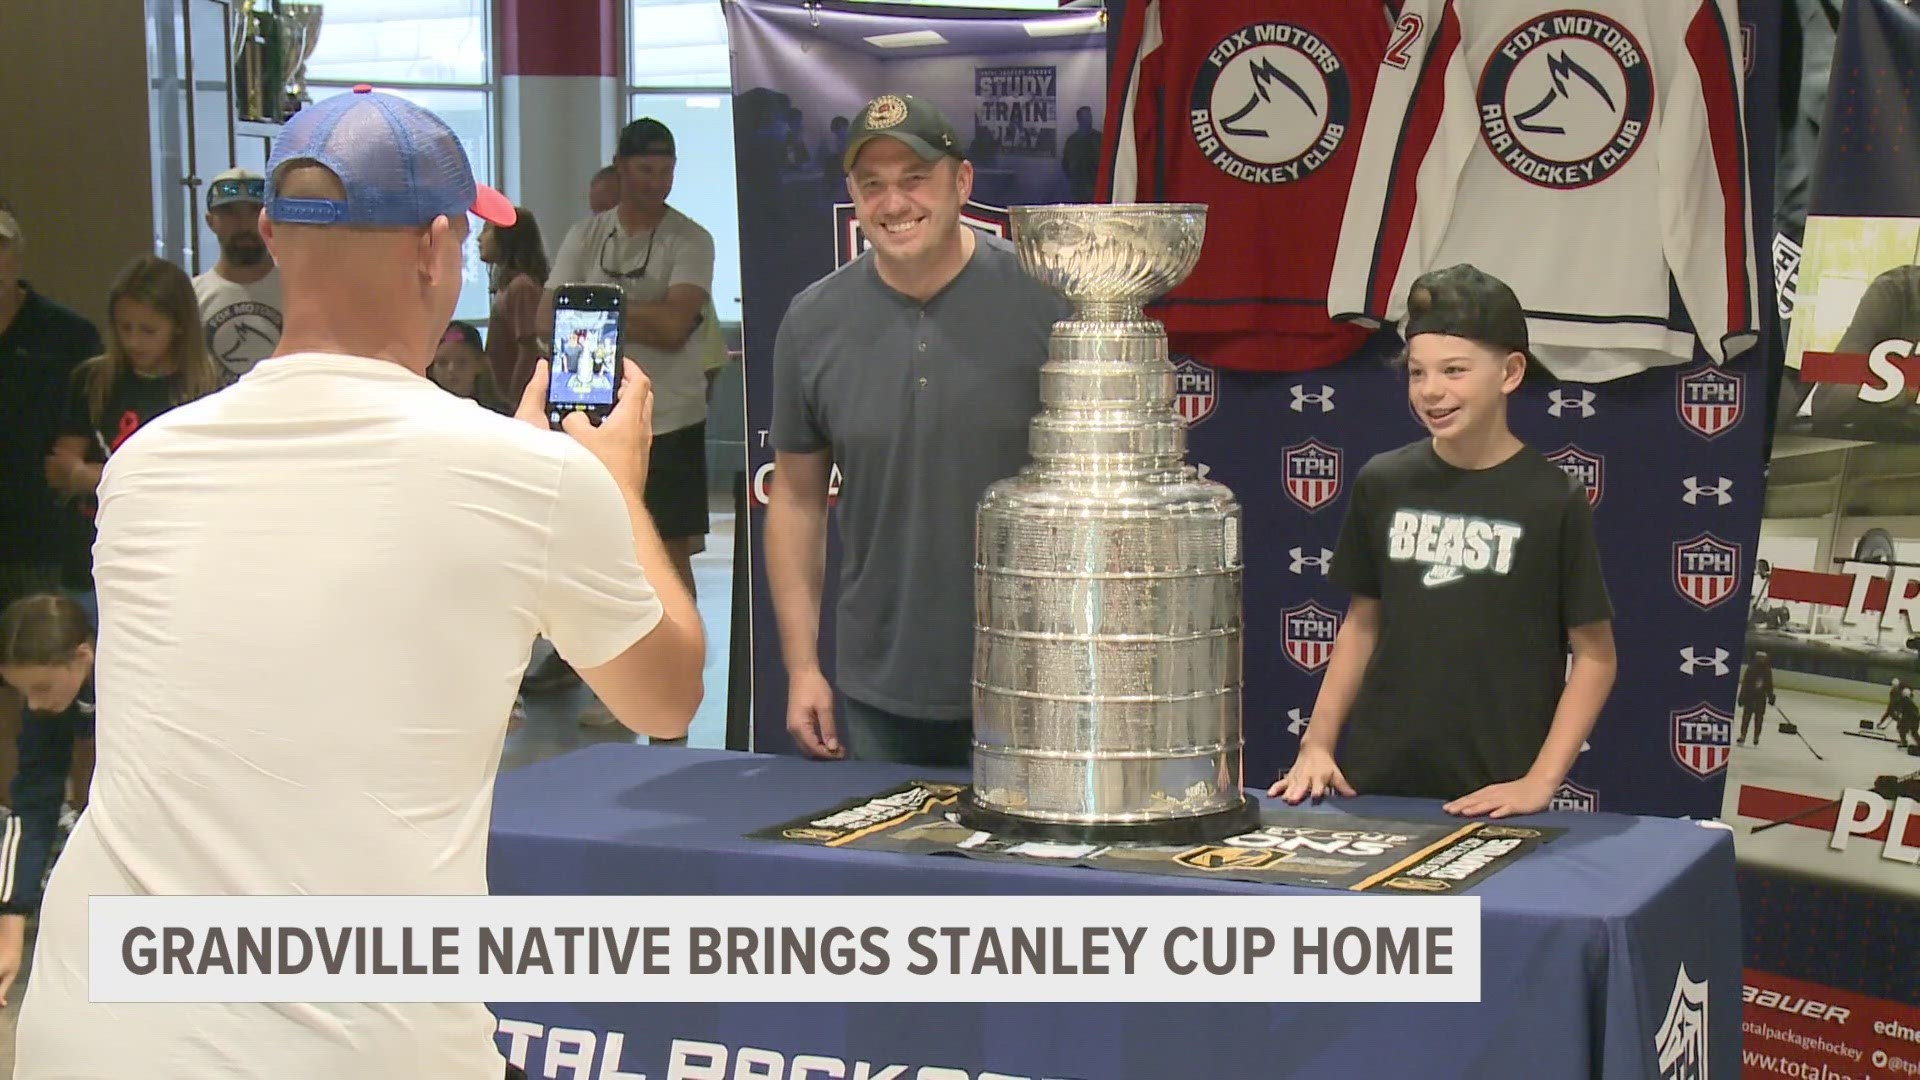 Davidson Adams decided to bring Lord Stanley to the Southside Ice Arena in Byron Center to allow hockey fans to take pictures with it.